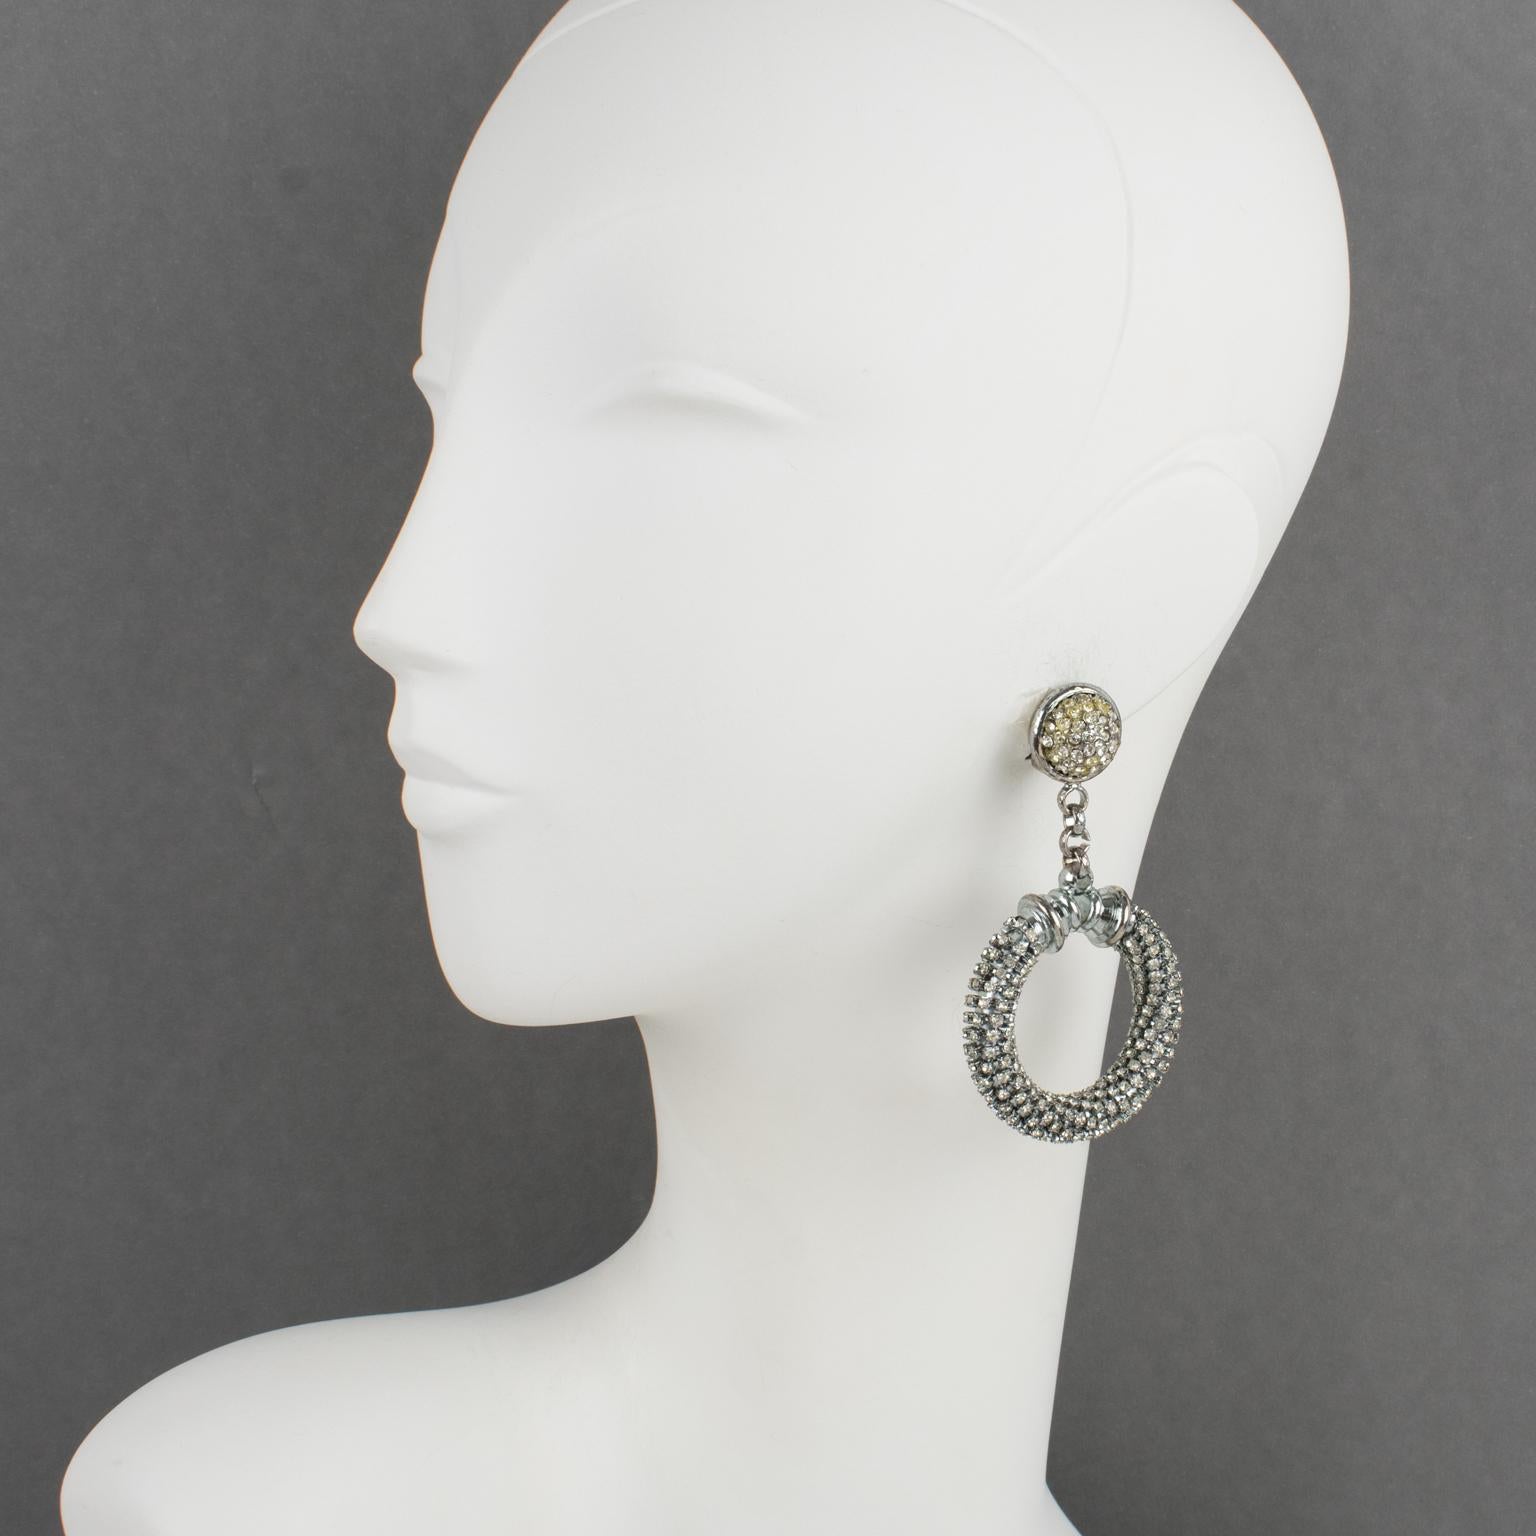 Gianfranco Ferre, Italy, designed these eye-catching couture clip-on earrings. A statement shape built with a silvered metal doorknob or door knocker framing, all paved with tiny crystal rhinestones. The 